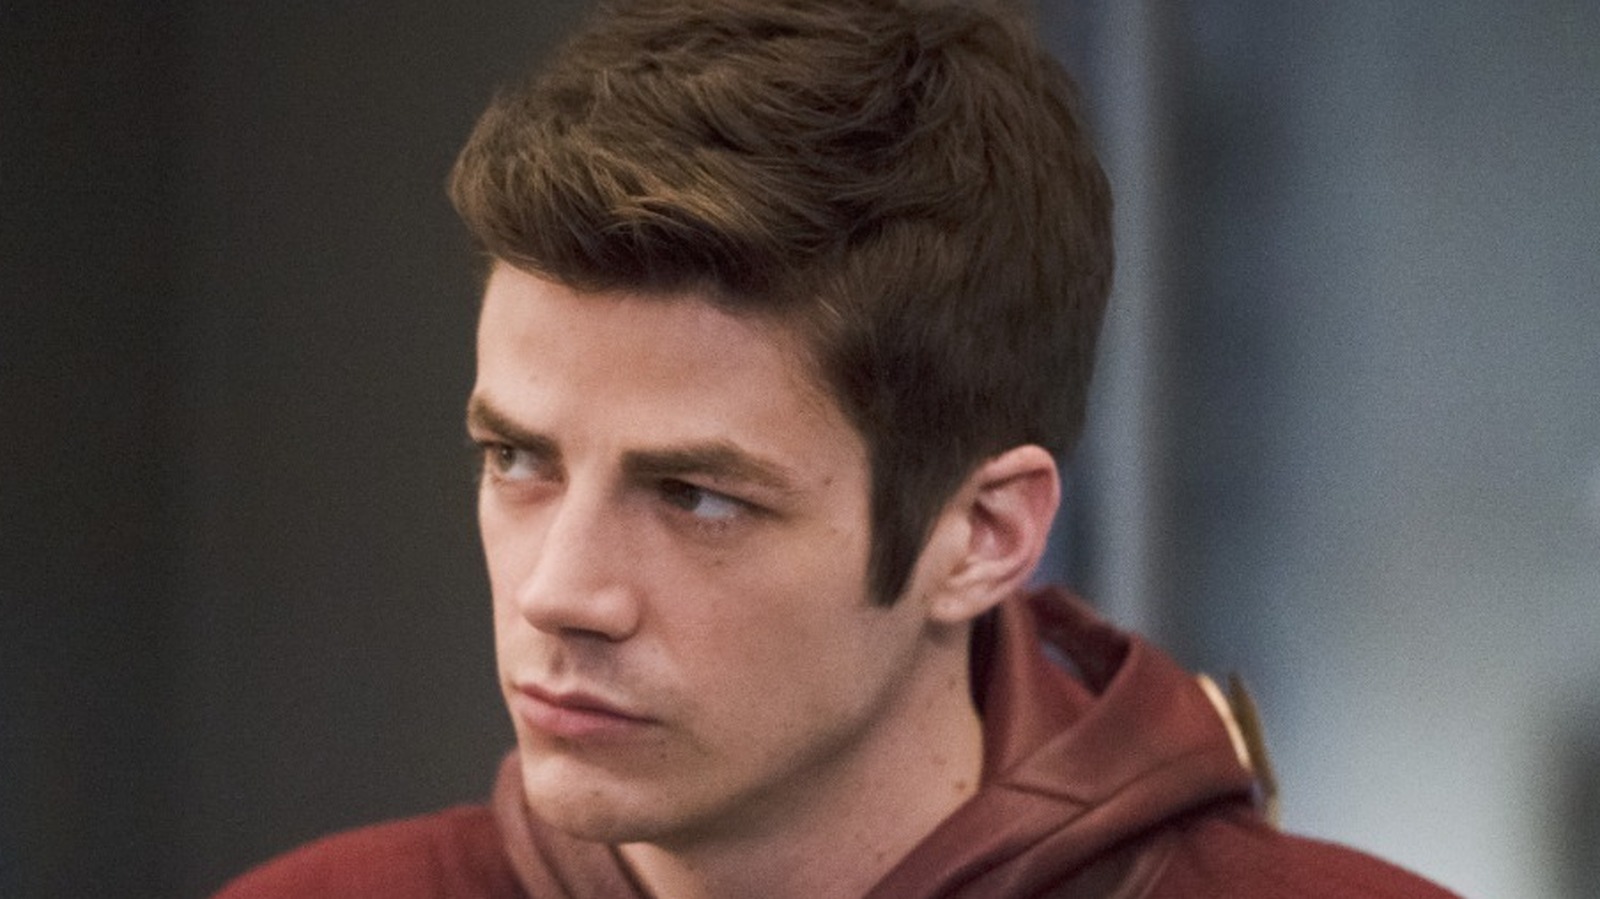 The Flash showrunner teases series finale happy ending